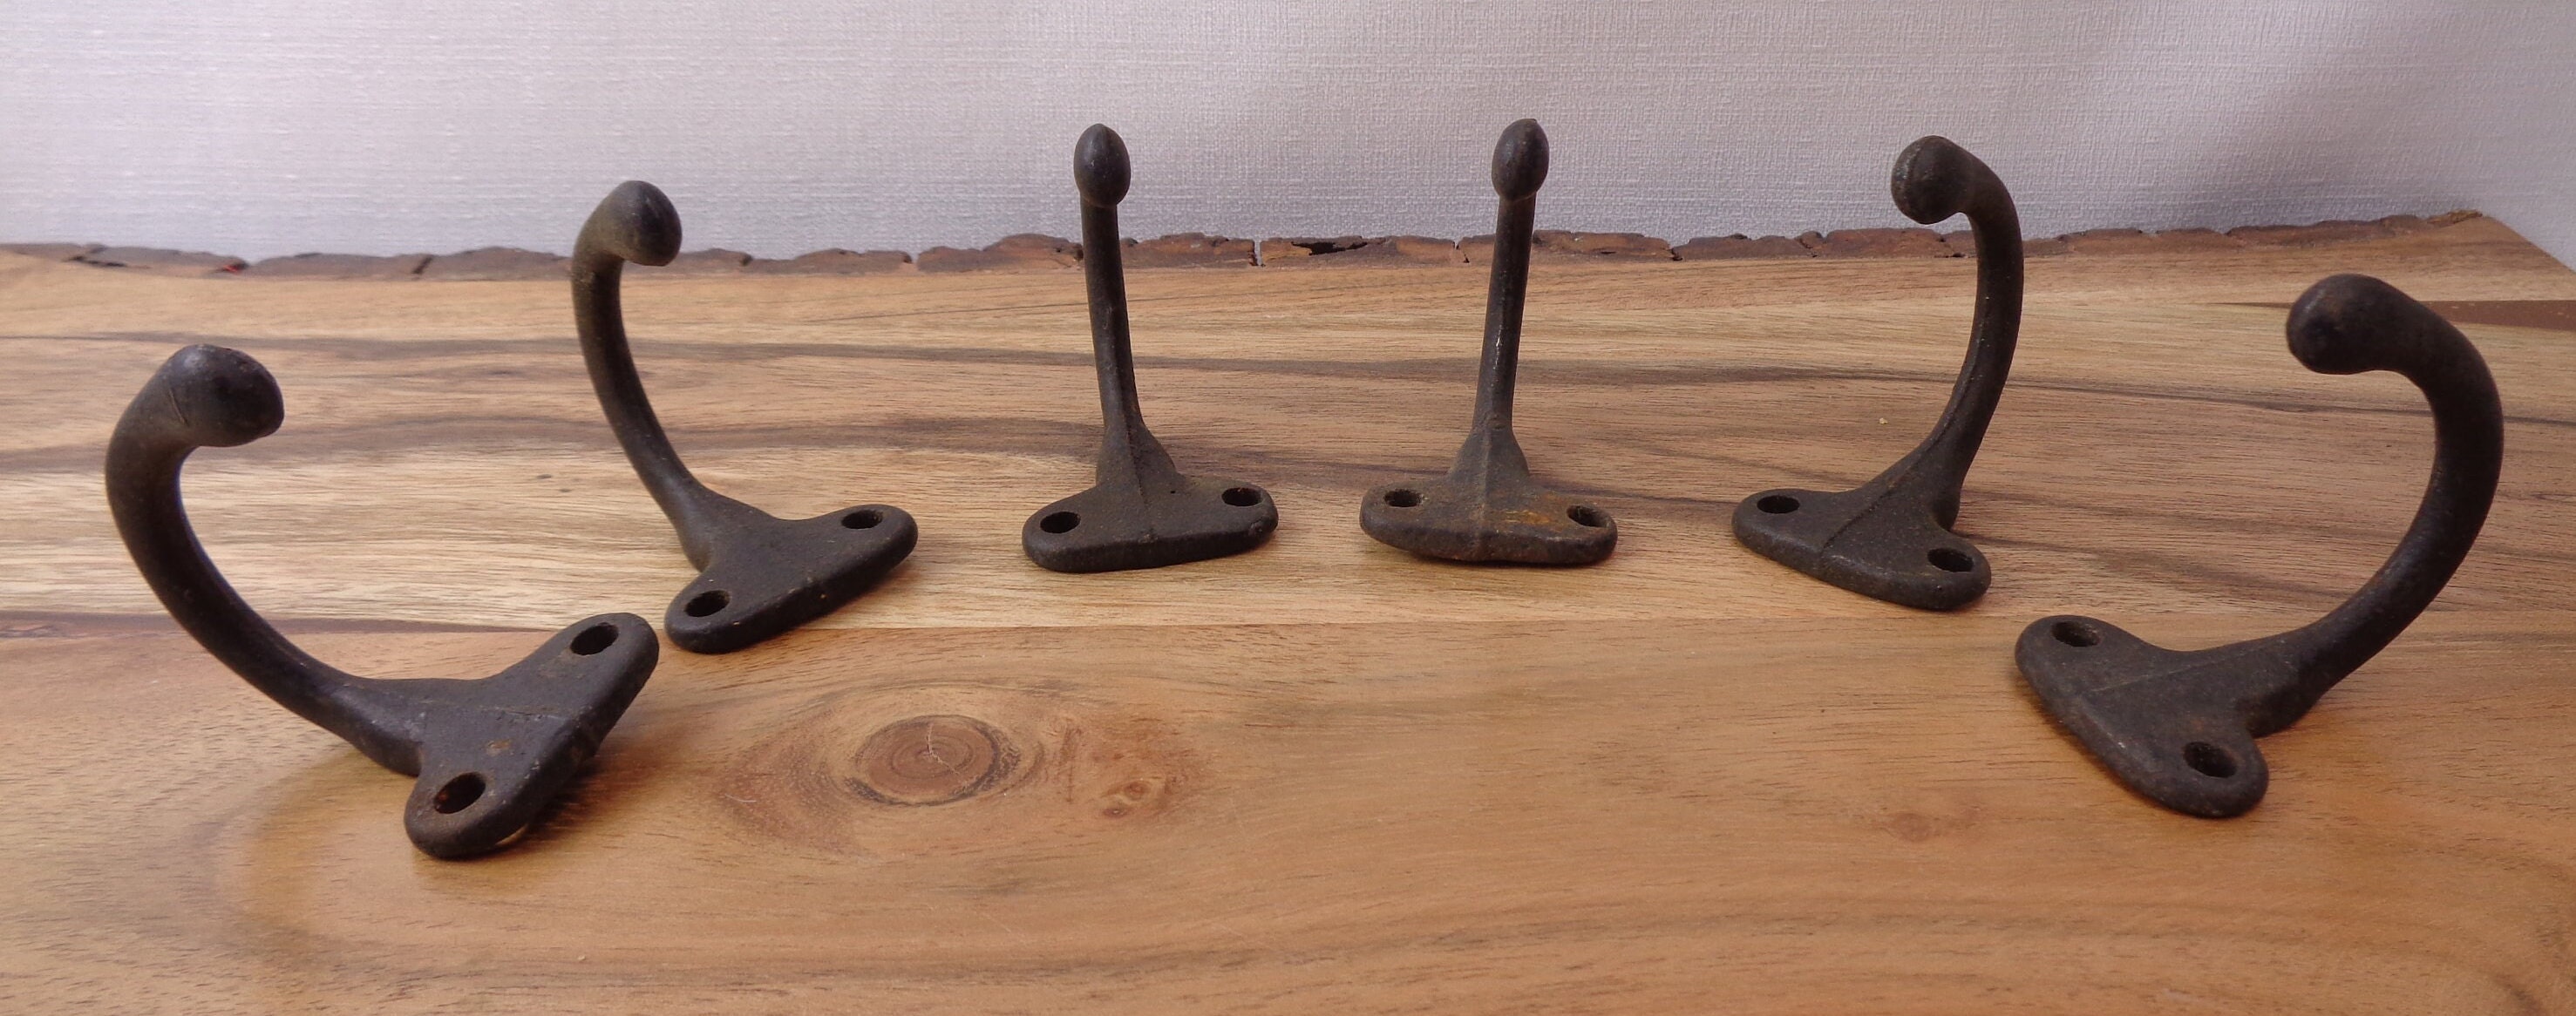 6 x Vintage Style Cast Iron Coat Heart Hooks NEW for sale in Co